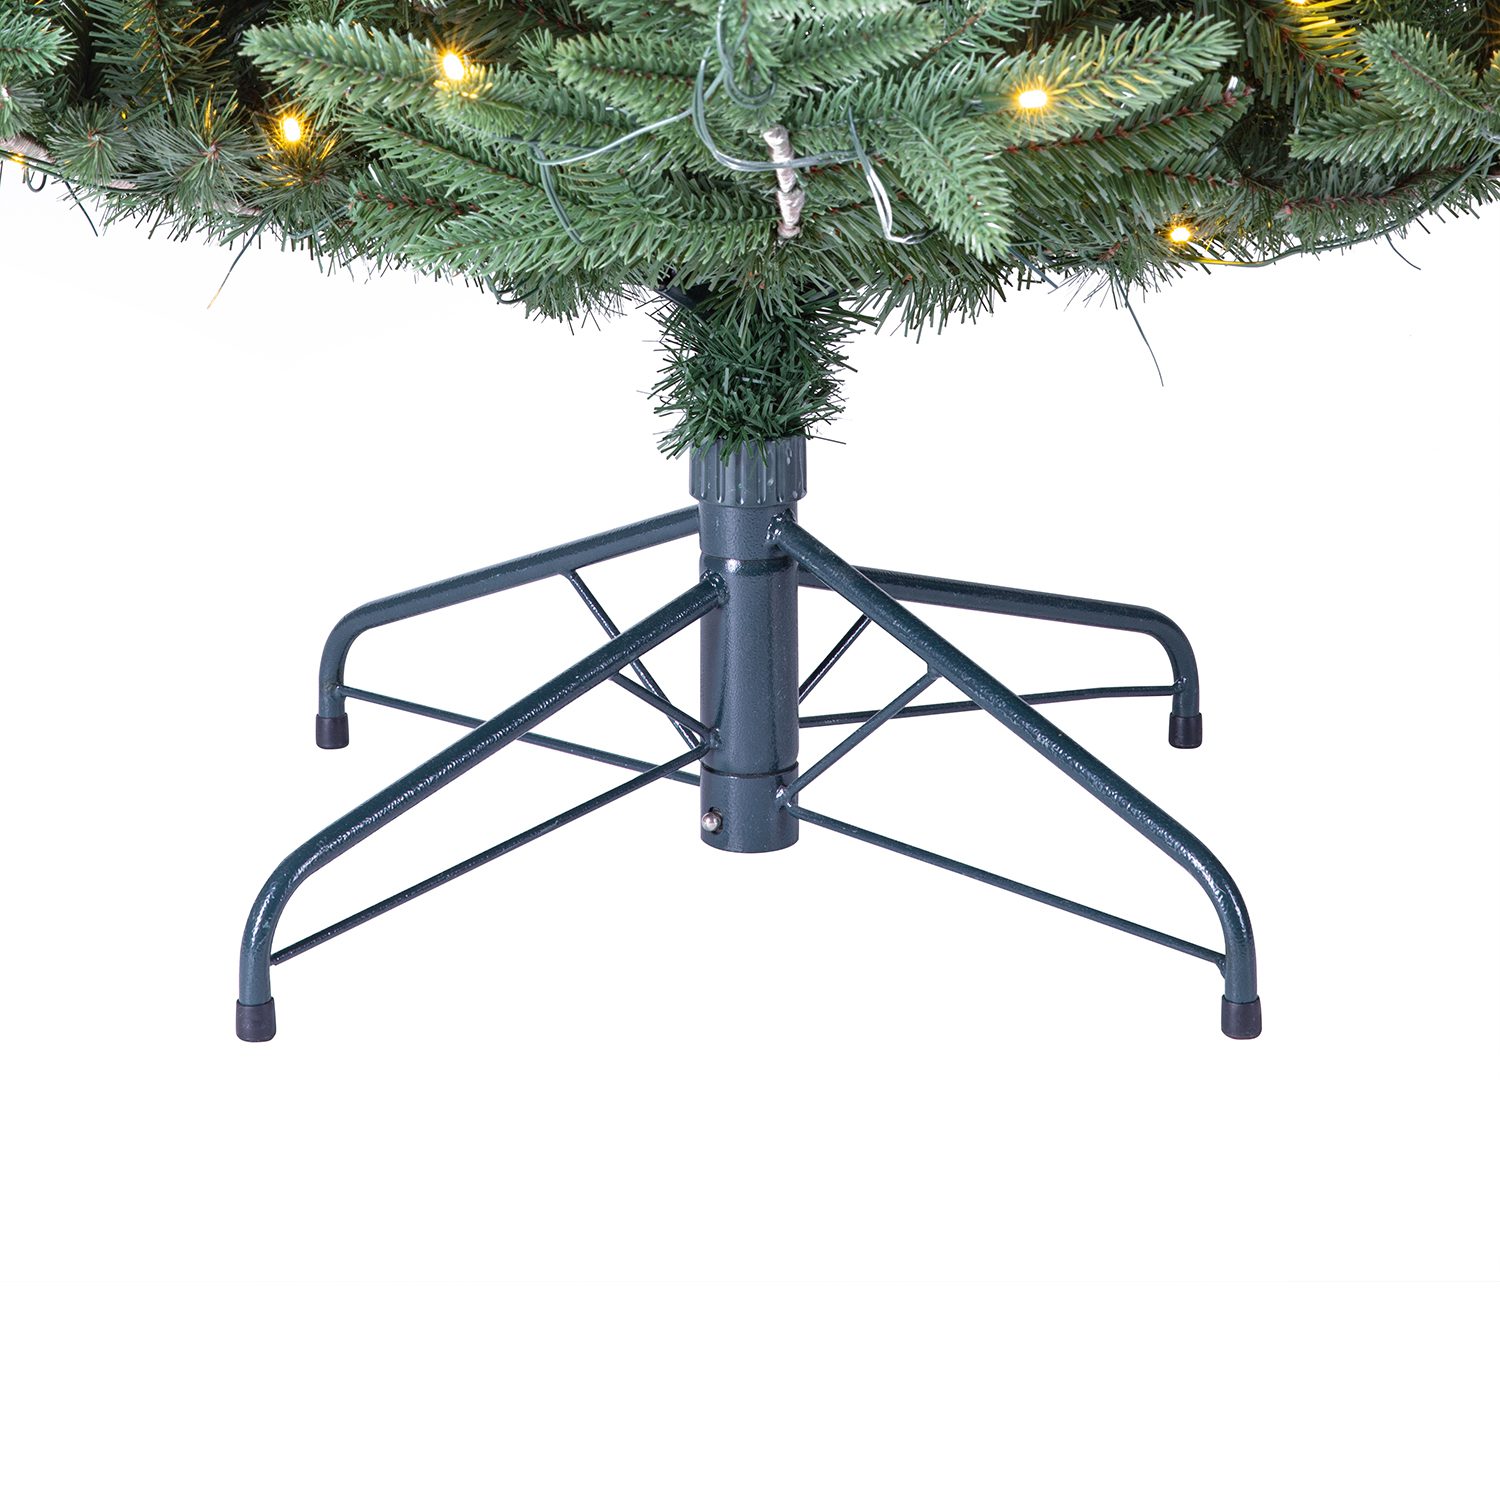 Close up of metal christmas tree stand